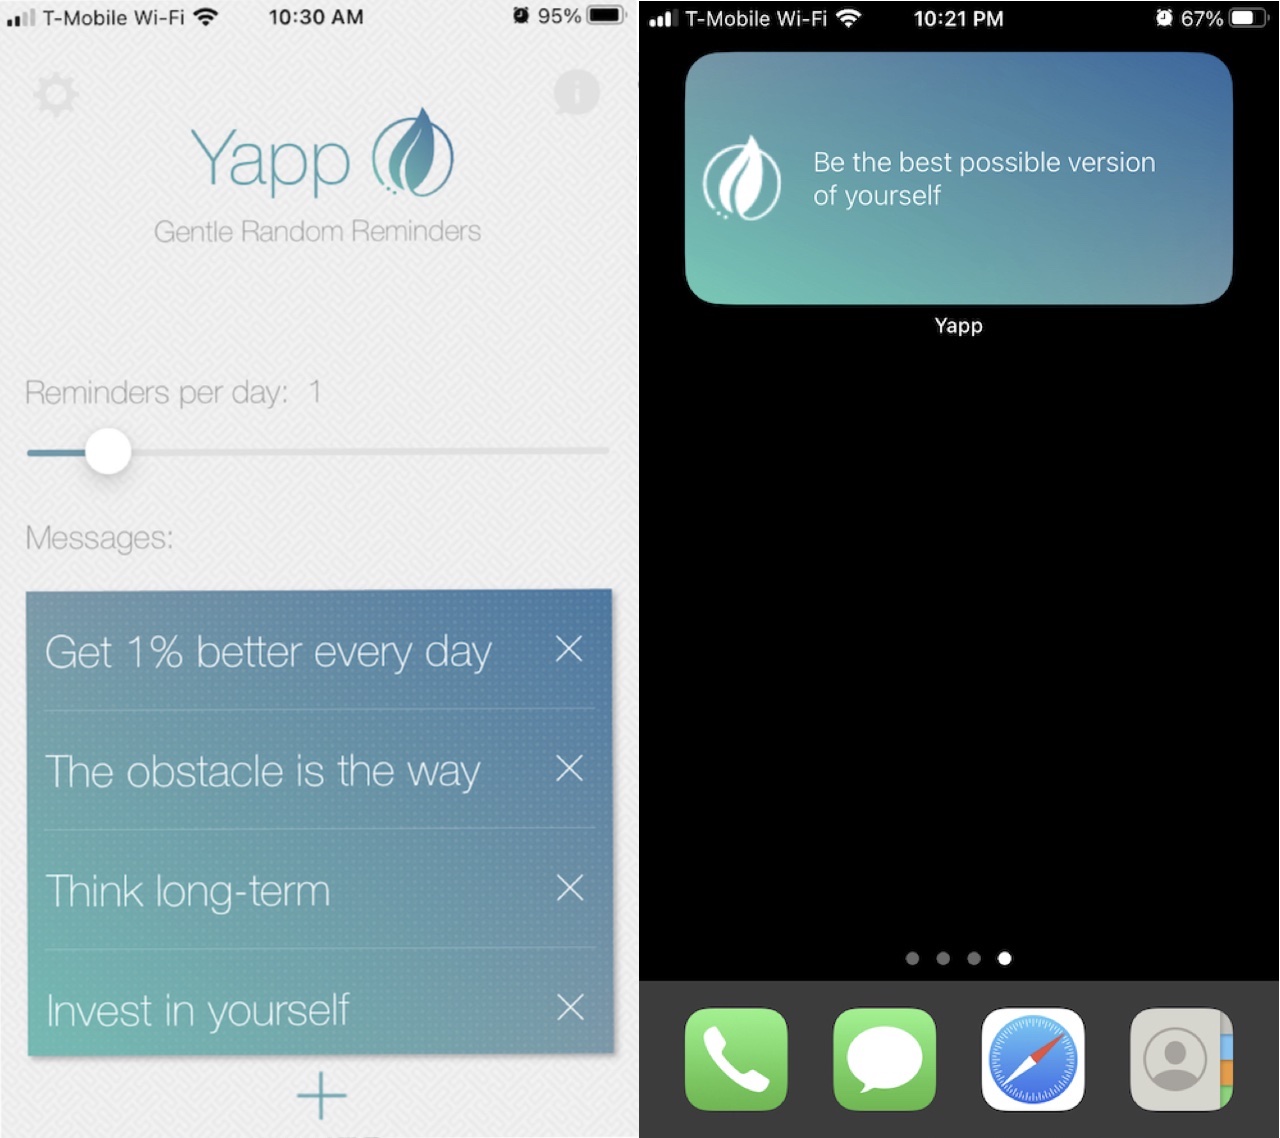 My iPhone, showing the interface of the Yapp Reminders app and the Yapp widget placed on my home screen